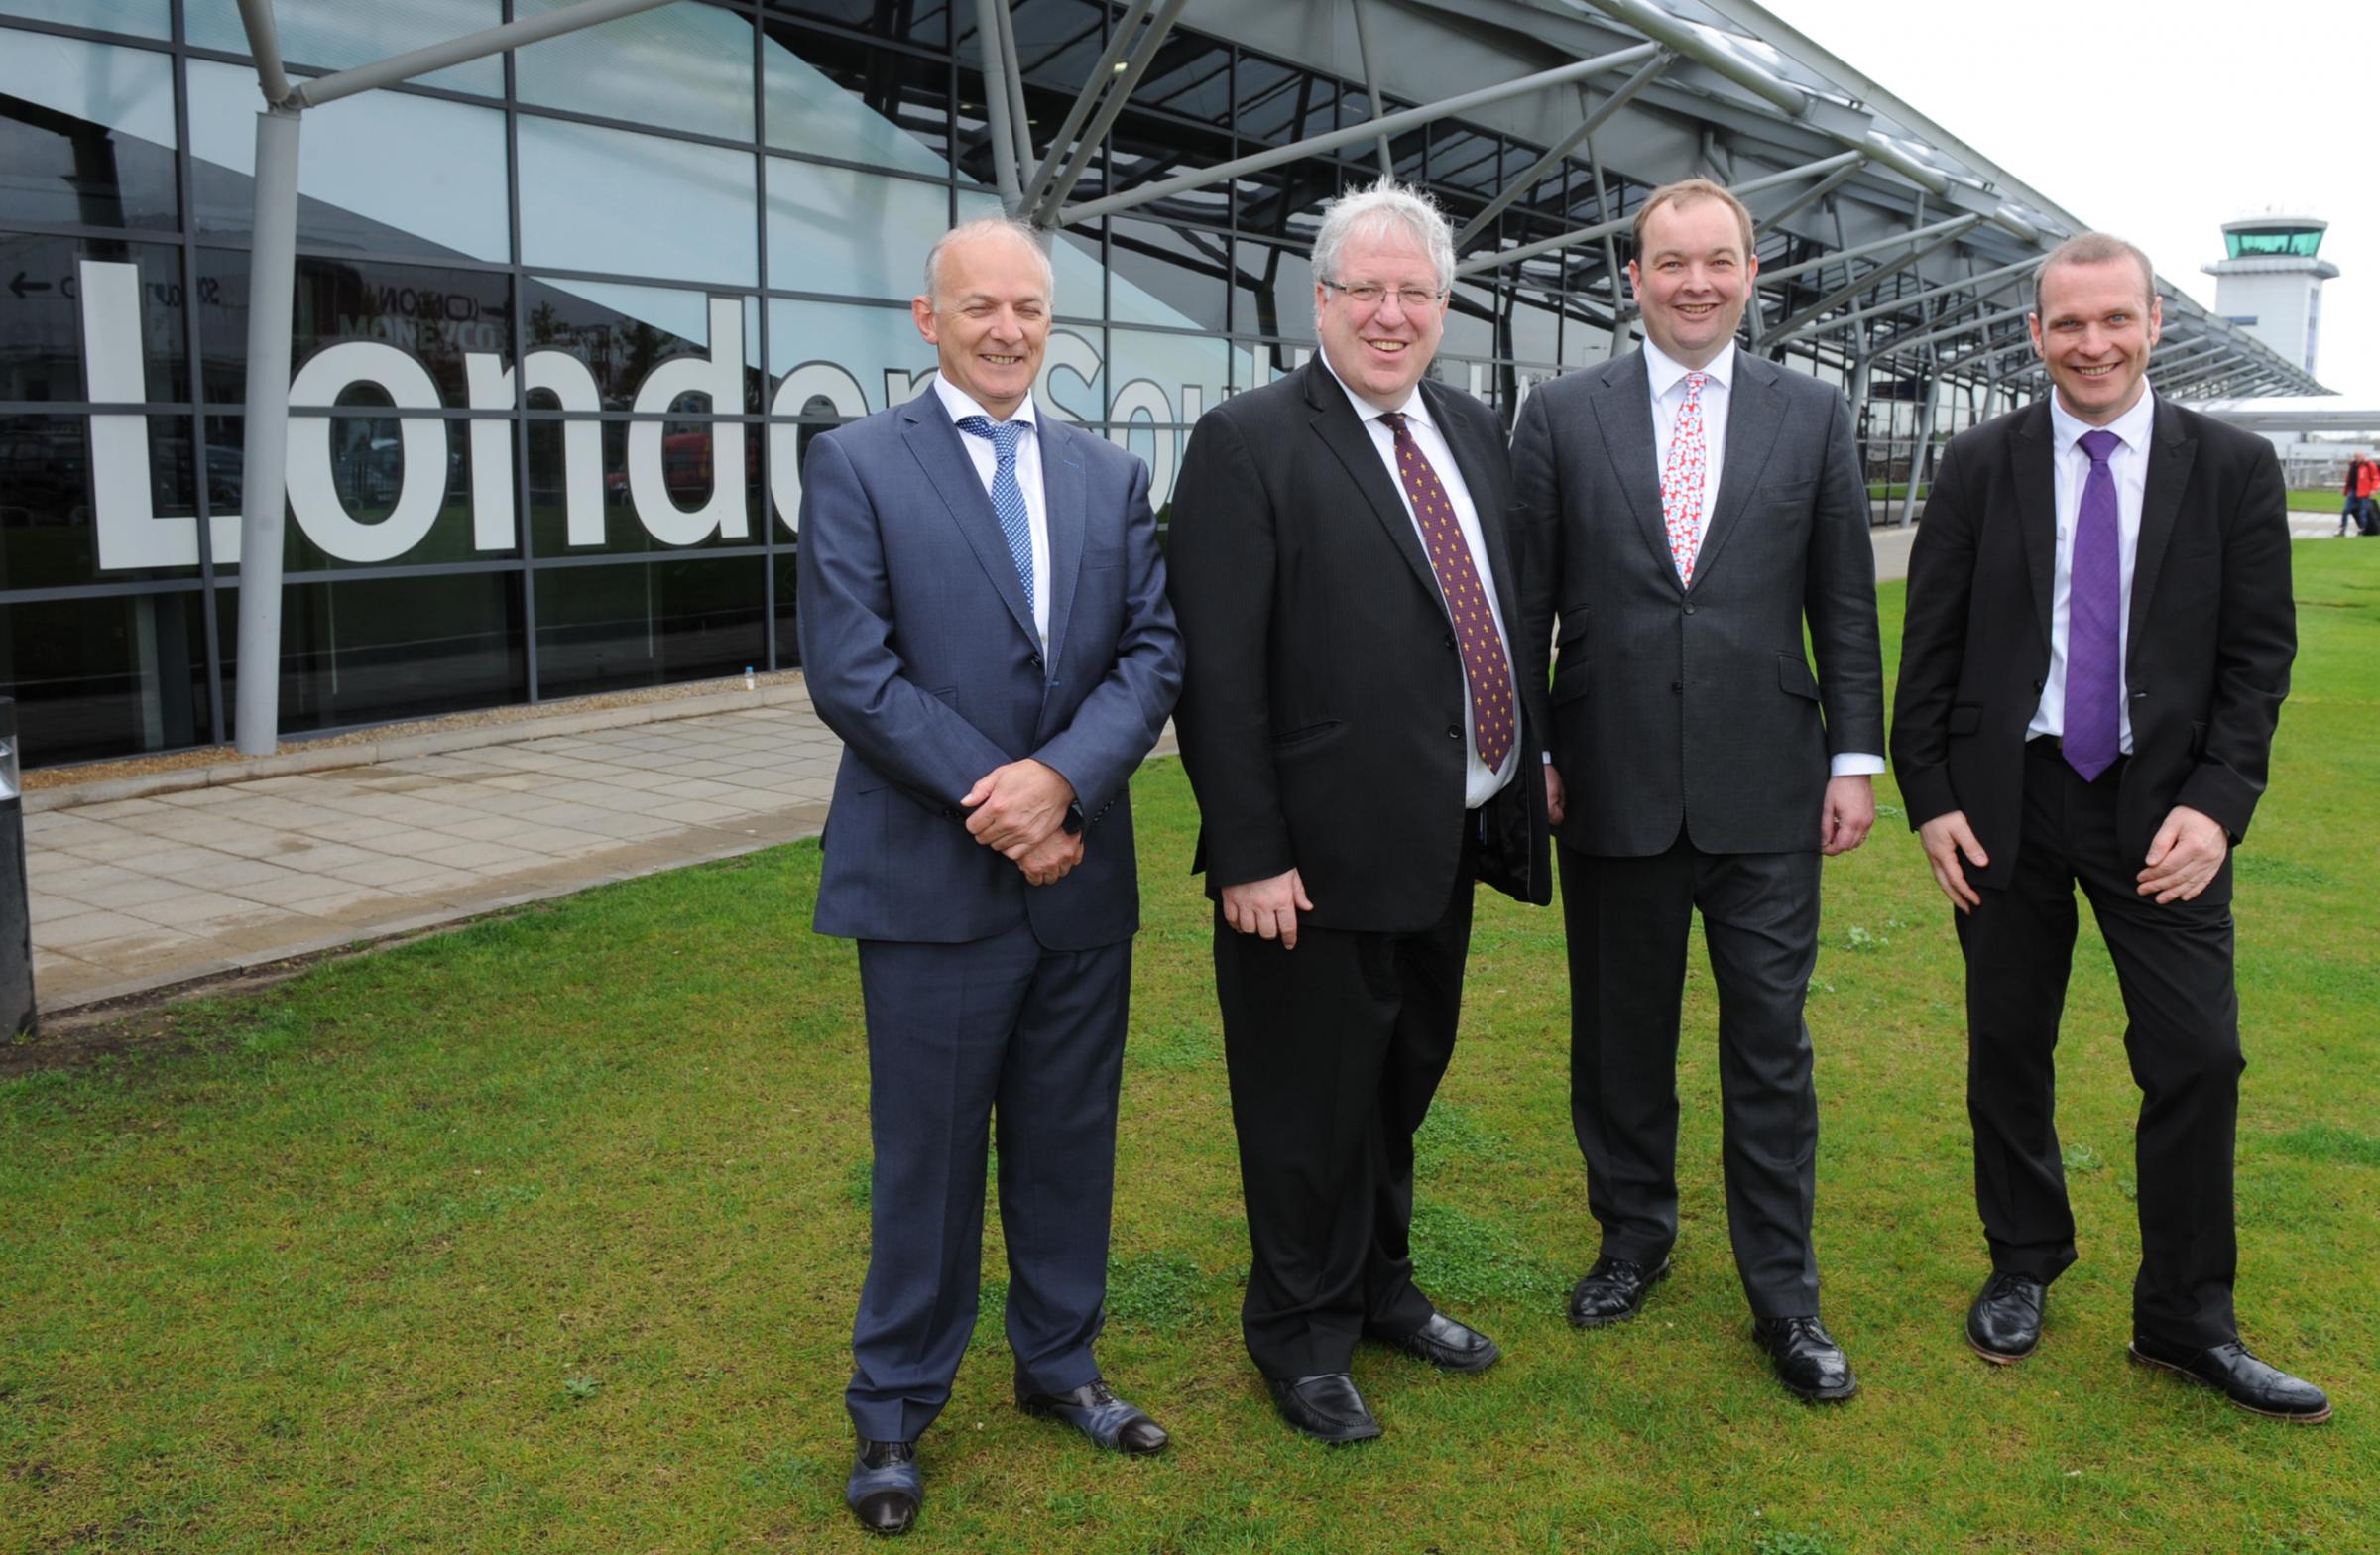 All smiles - transport secretary Patrick McLoughlin (second from left) opened a new extension to the airport in April 2014